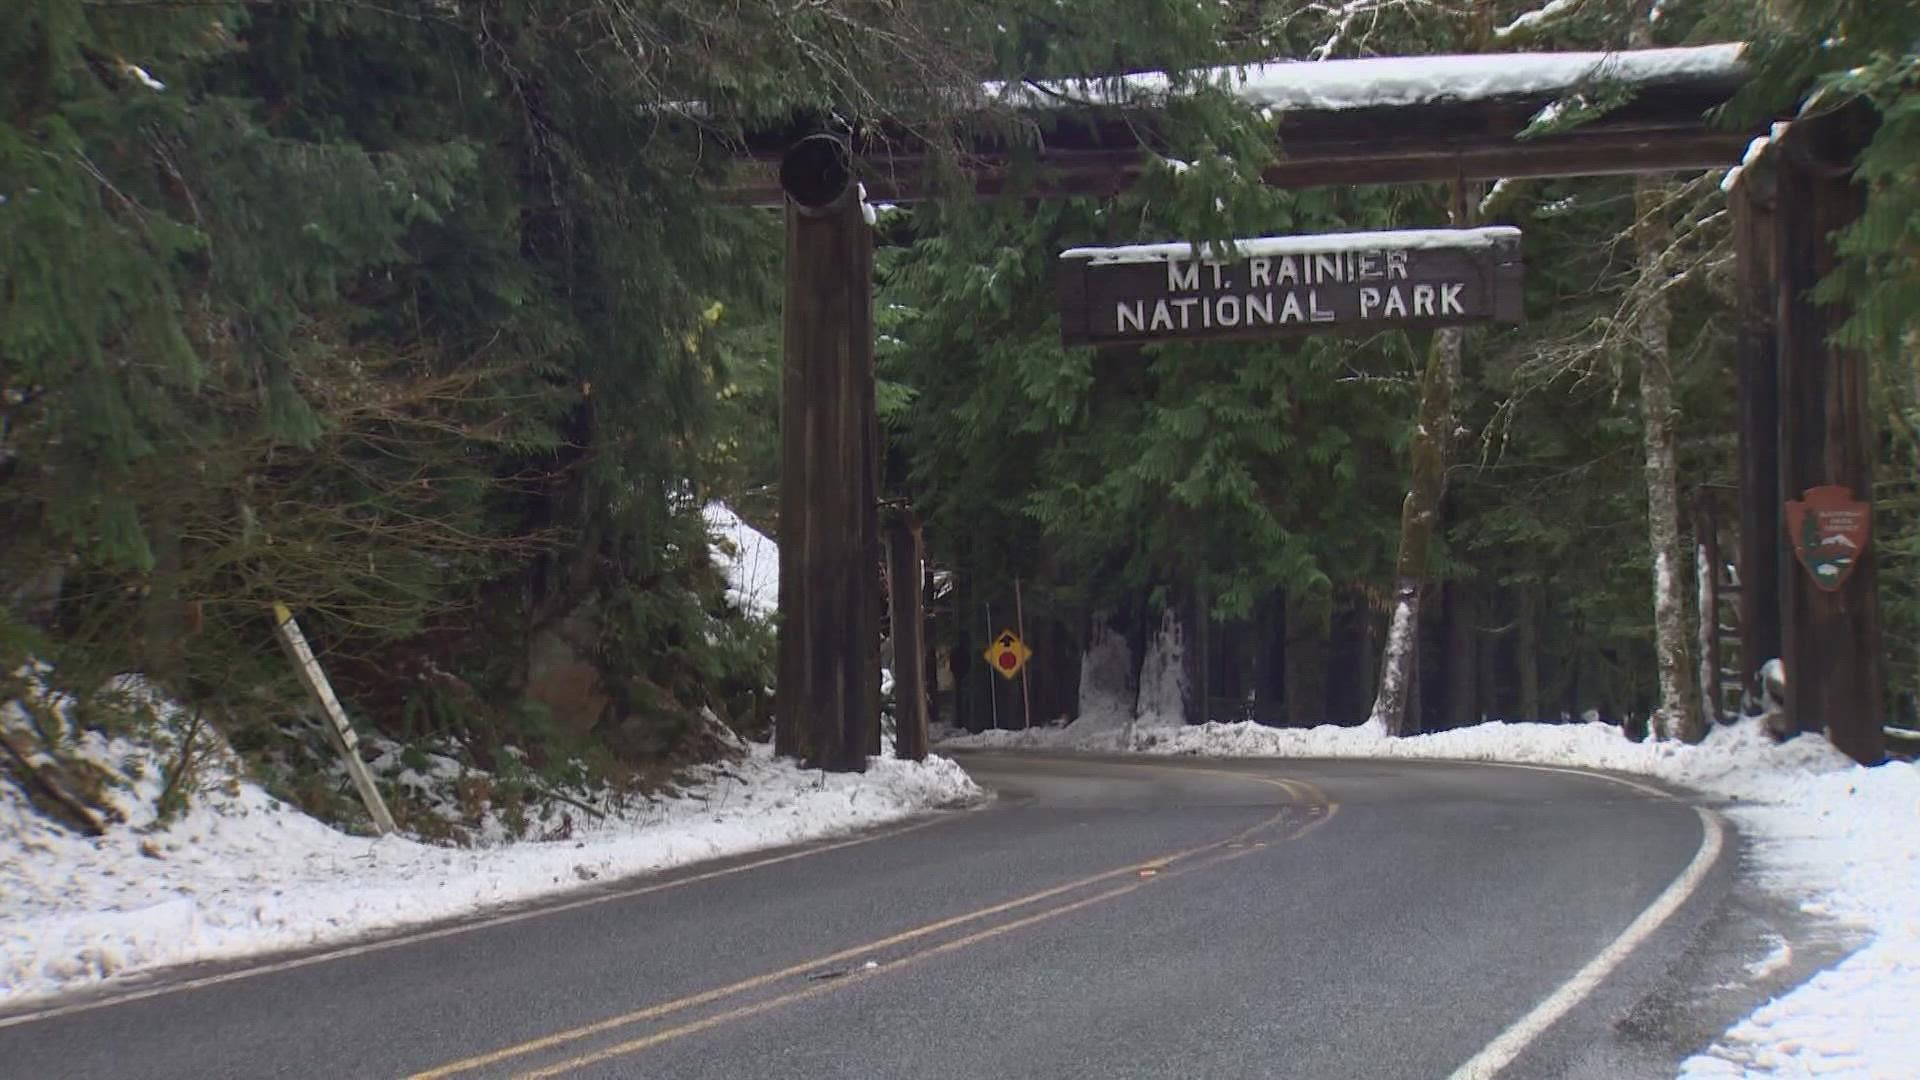 Staffing limitations forced Mount Rainier National Park to limit public car access at Paradise to only Saturdays and Sundays.